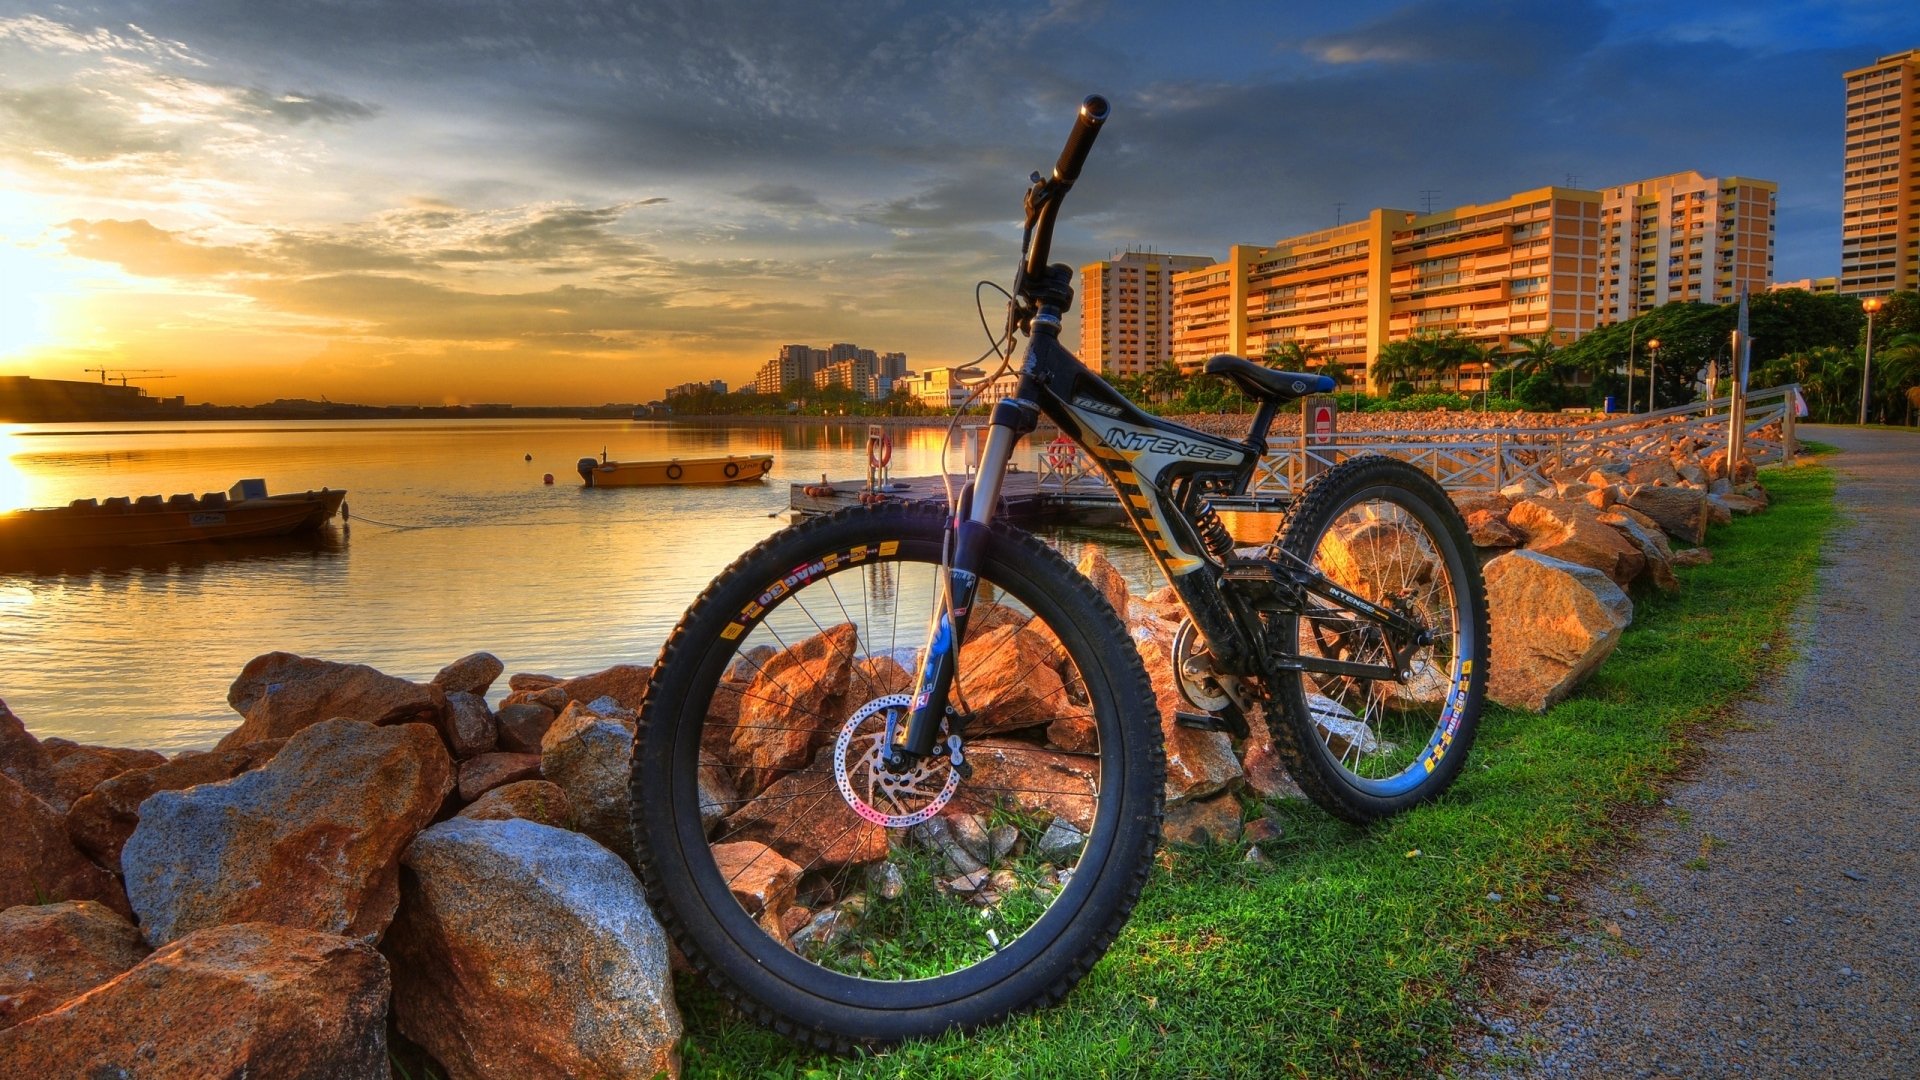 Bicycle Hd Wallpaper Background Image 1920x1080